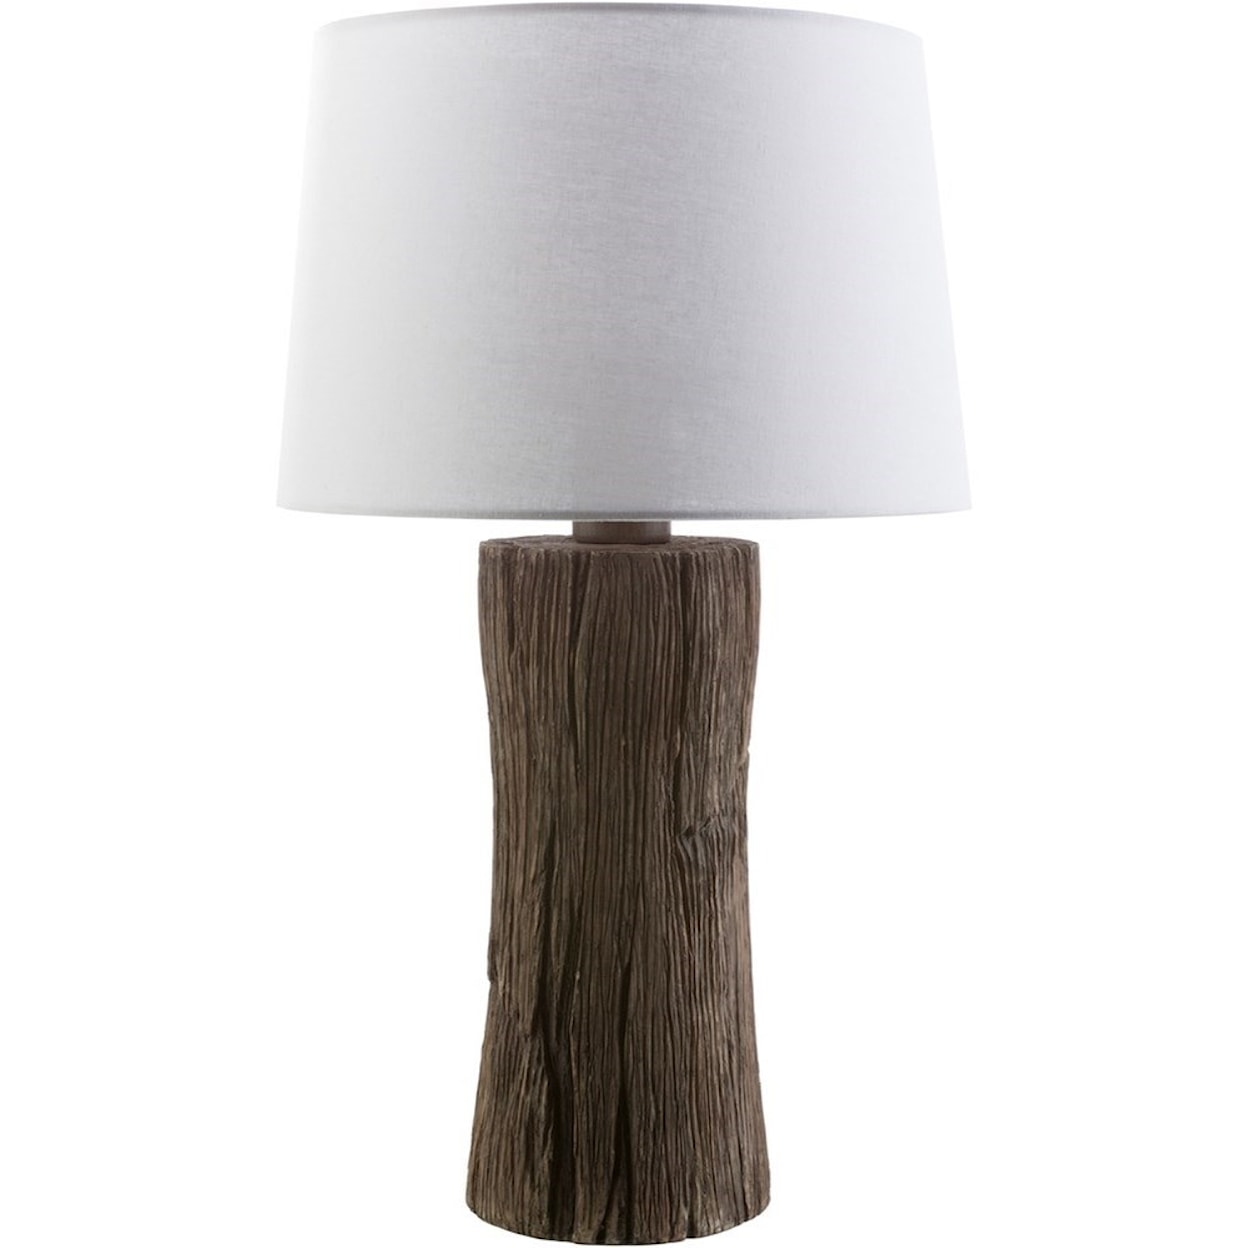 Surya Sycamore Faux wood Rustic Table Lamp